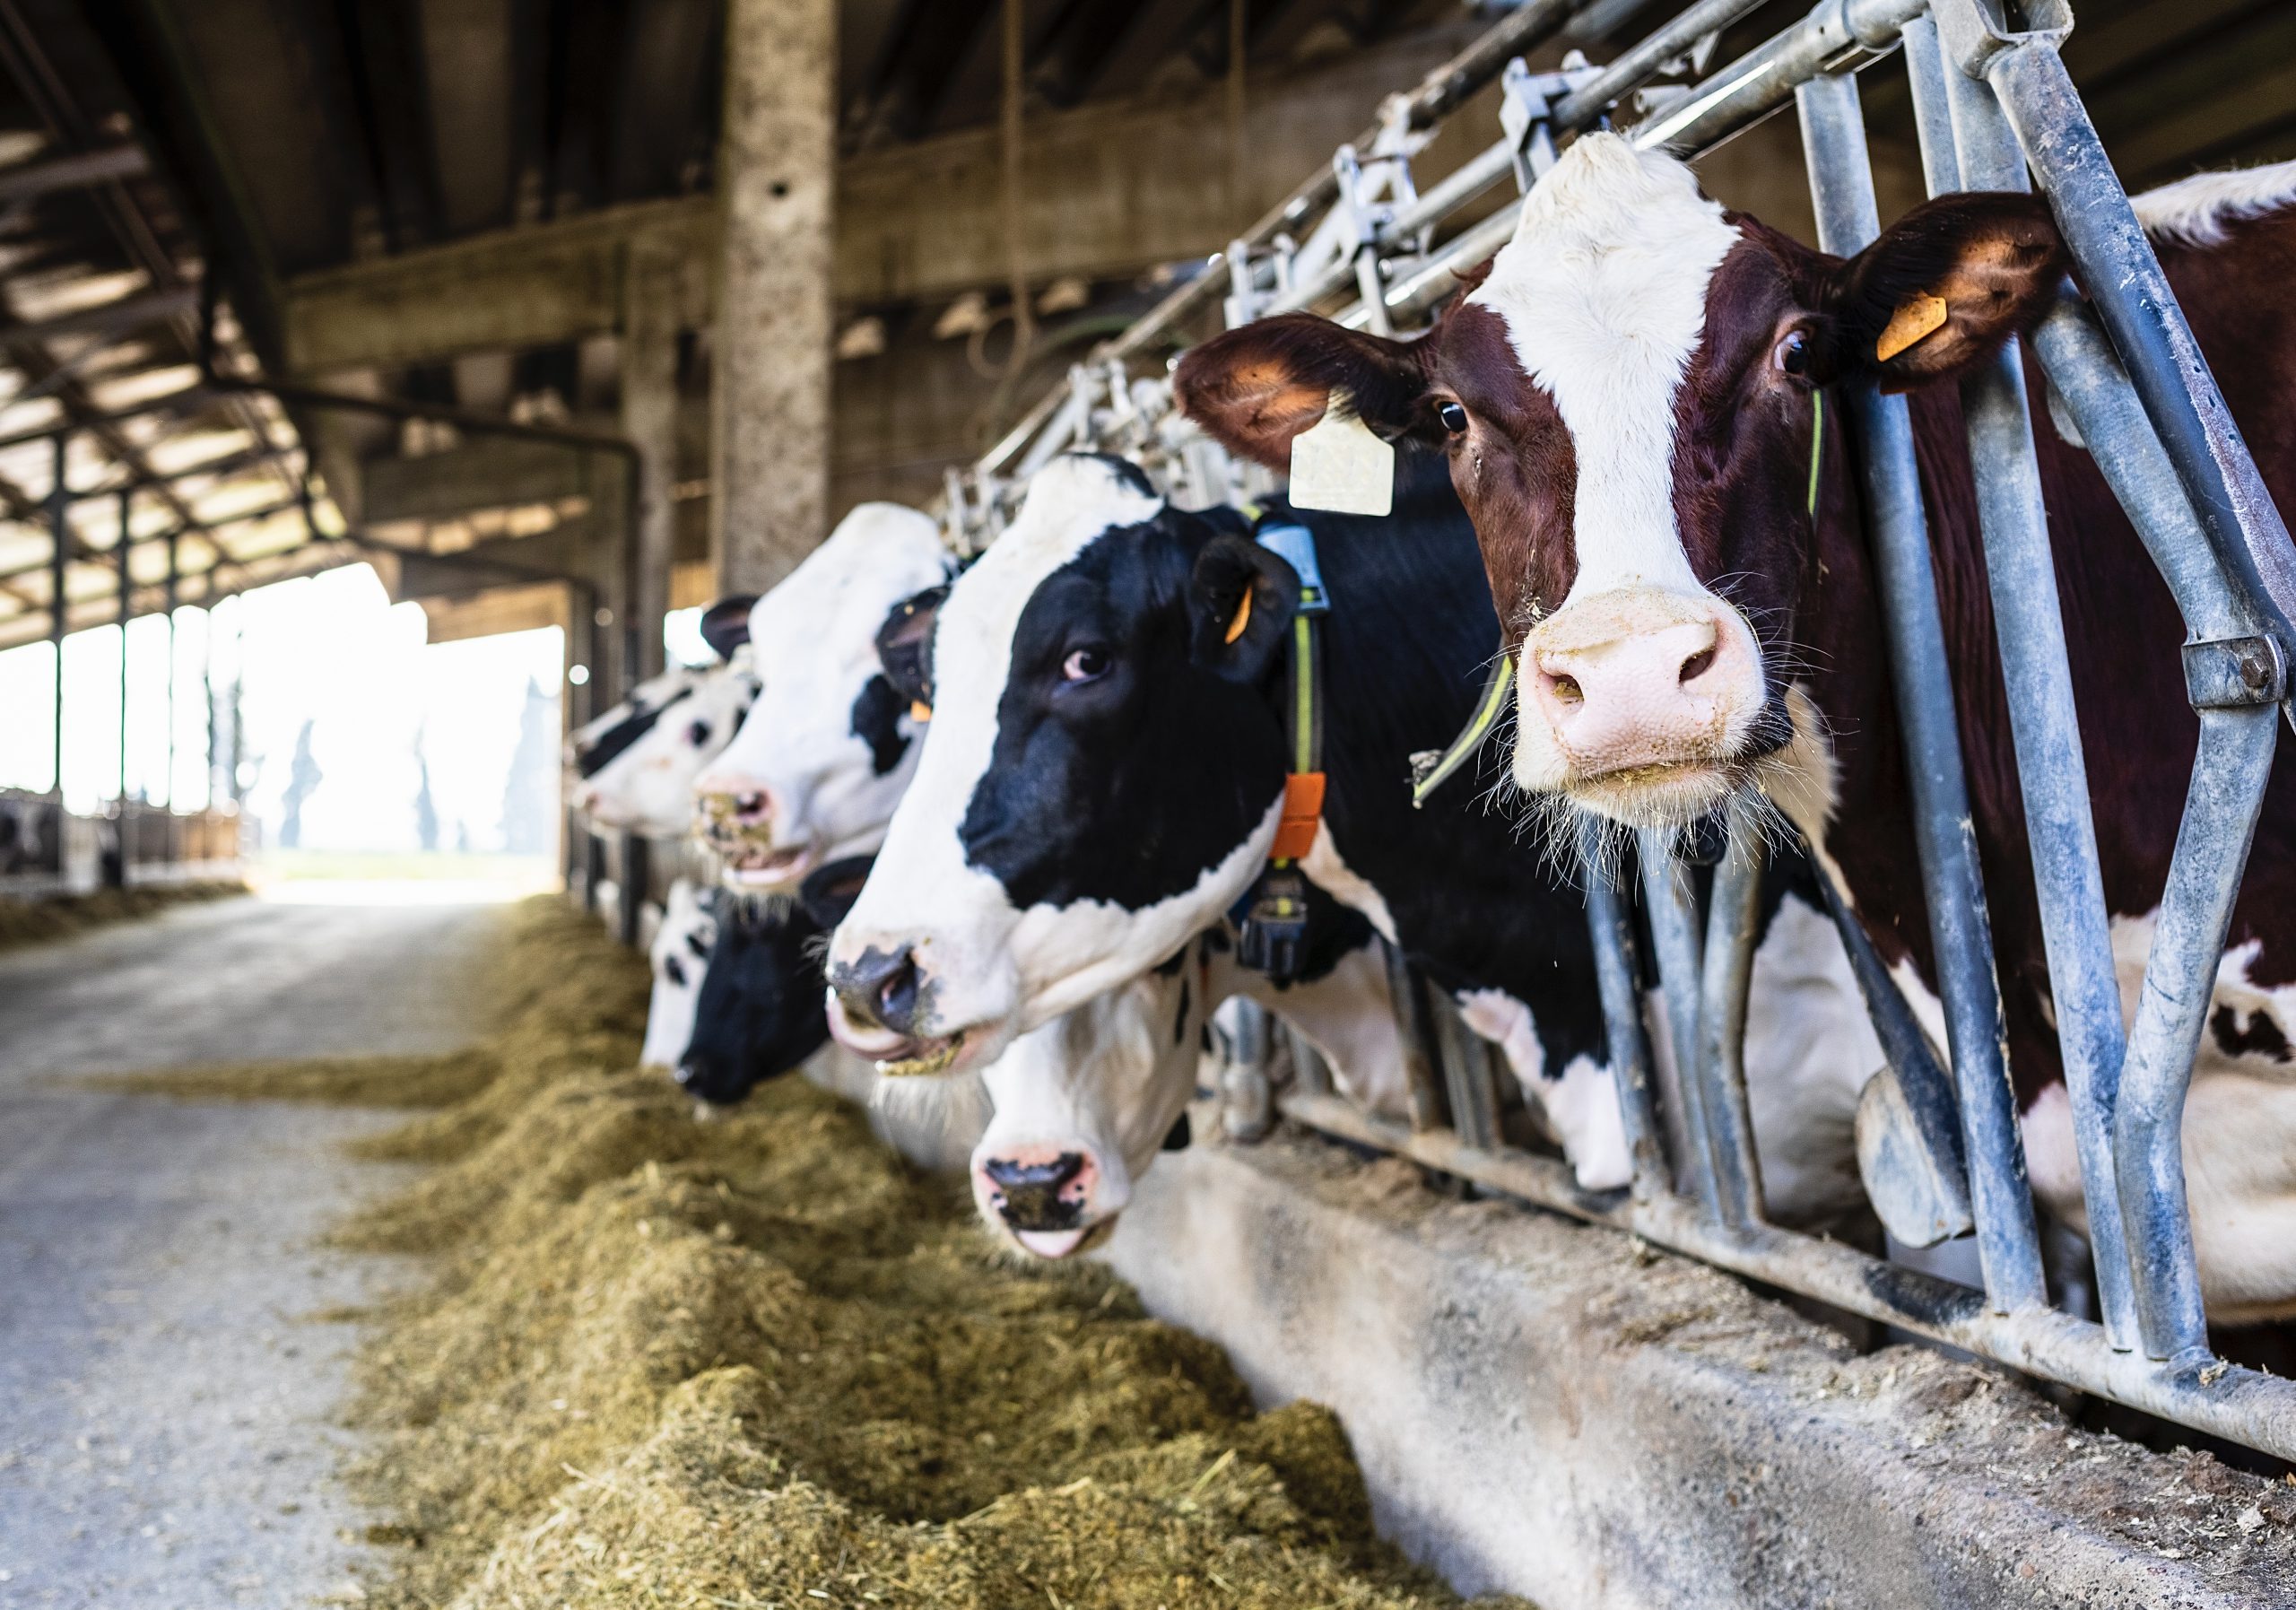 Breaking! A New Report Reveals That More Than 200 Million Pounds Of  Pesticides Are Applied To Crops Grown To Feed Animals On Factory Farms In  The United States - World Animal News